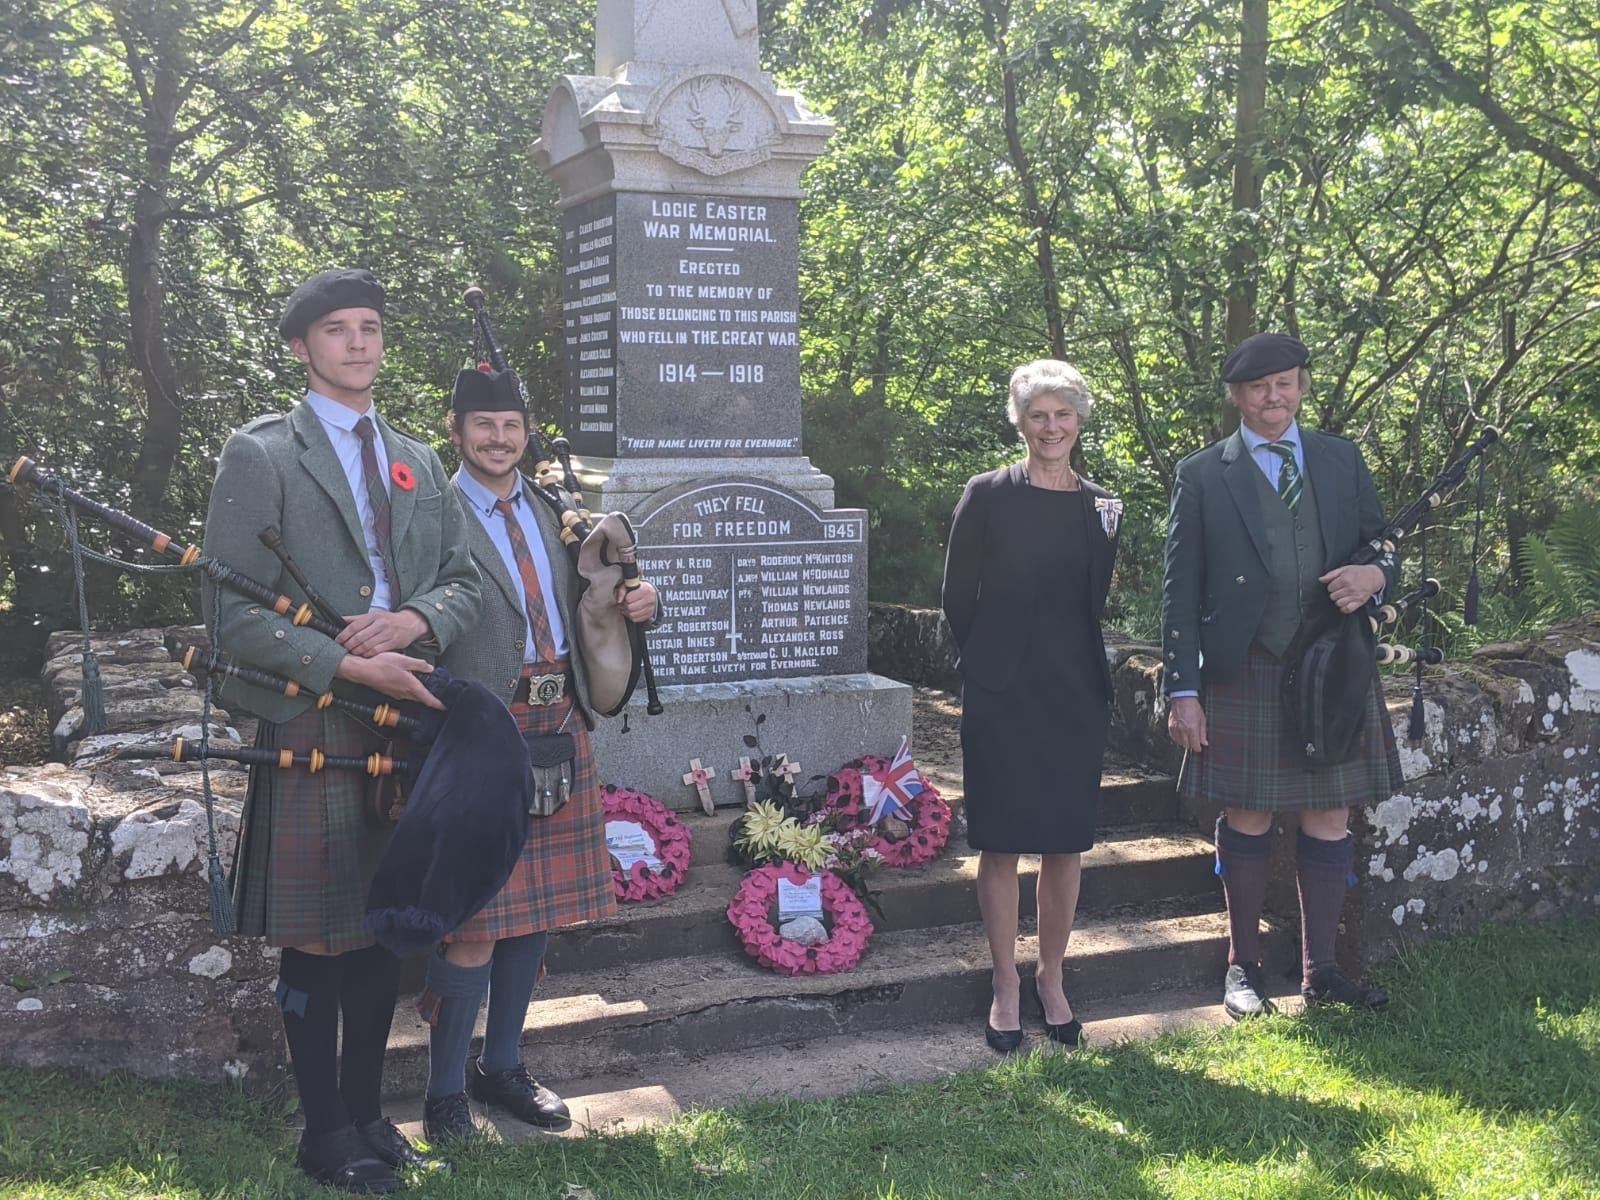 Ross-shire Lord Lieutenant Joanie Whiteford joined Duncan, Iain and Gregory MacGillivray at the Logie Memorial.